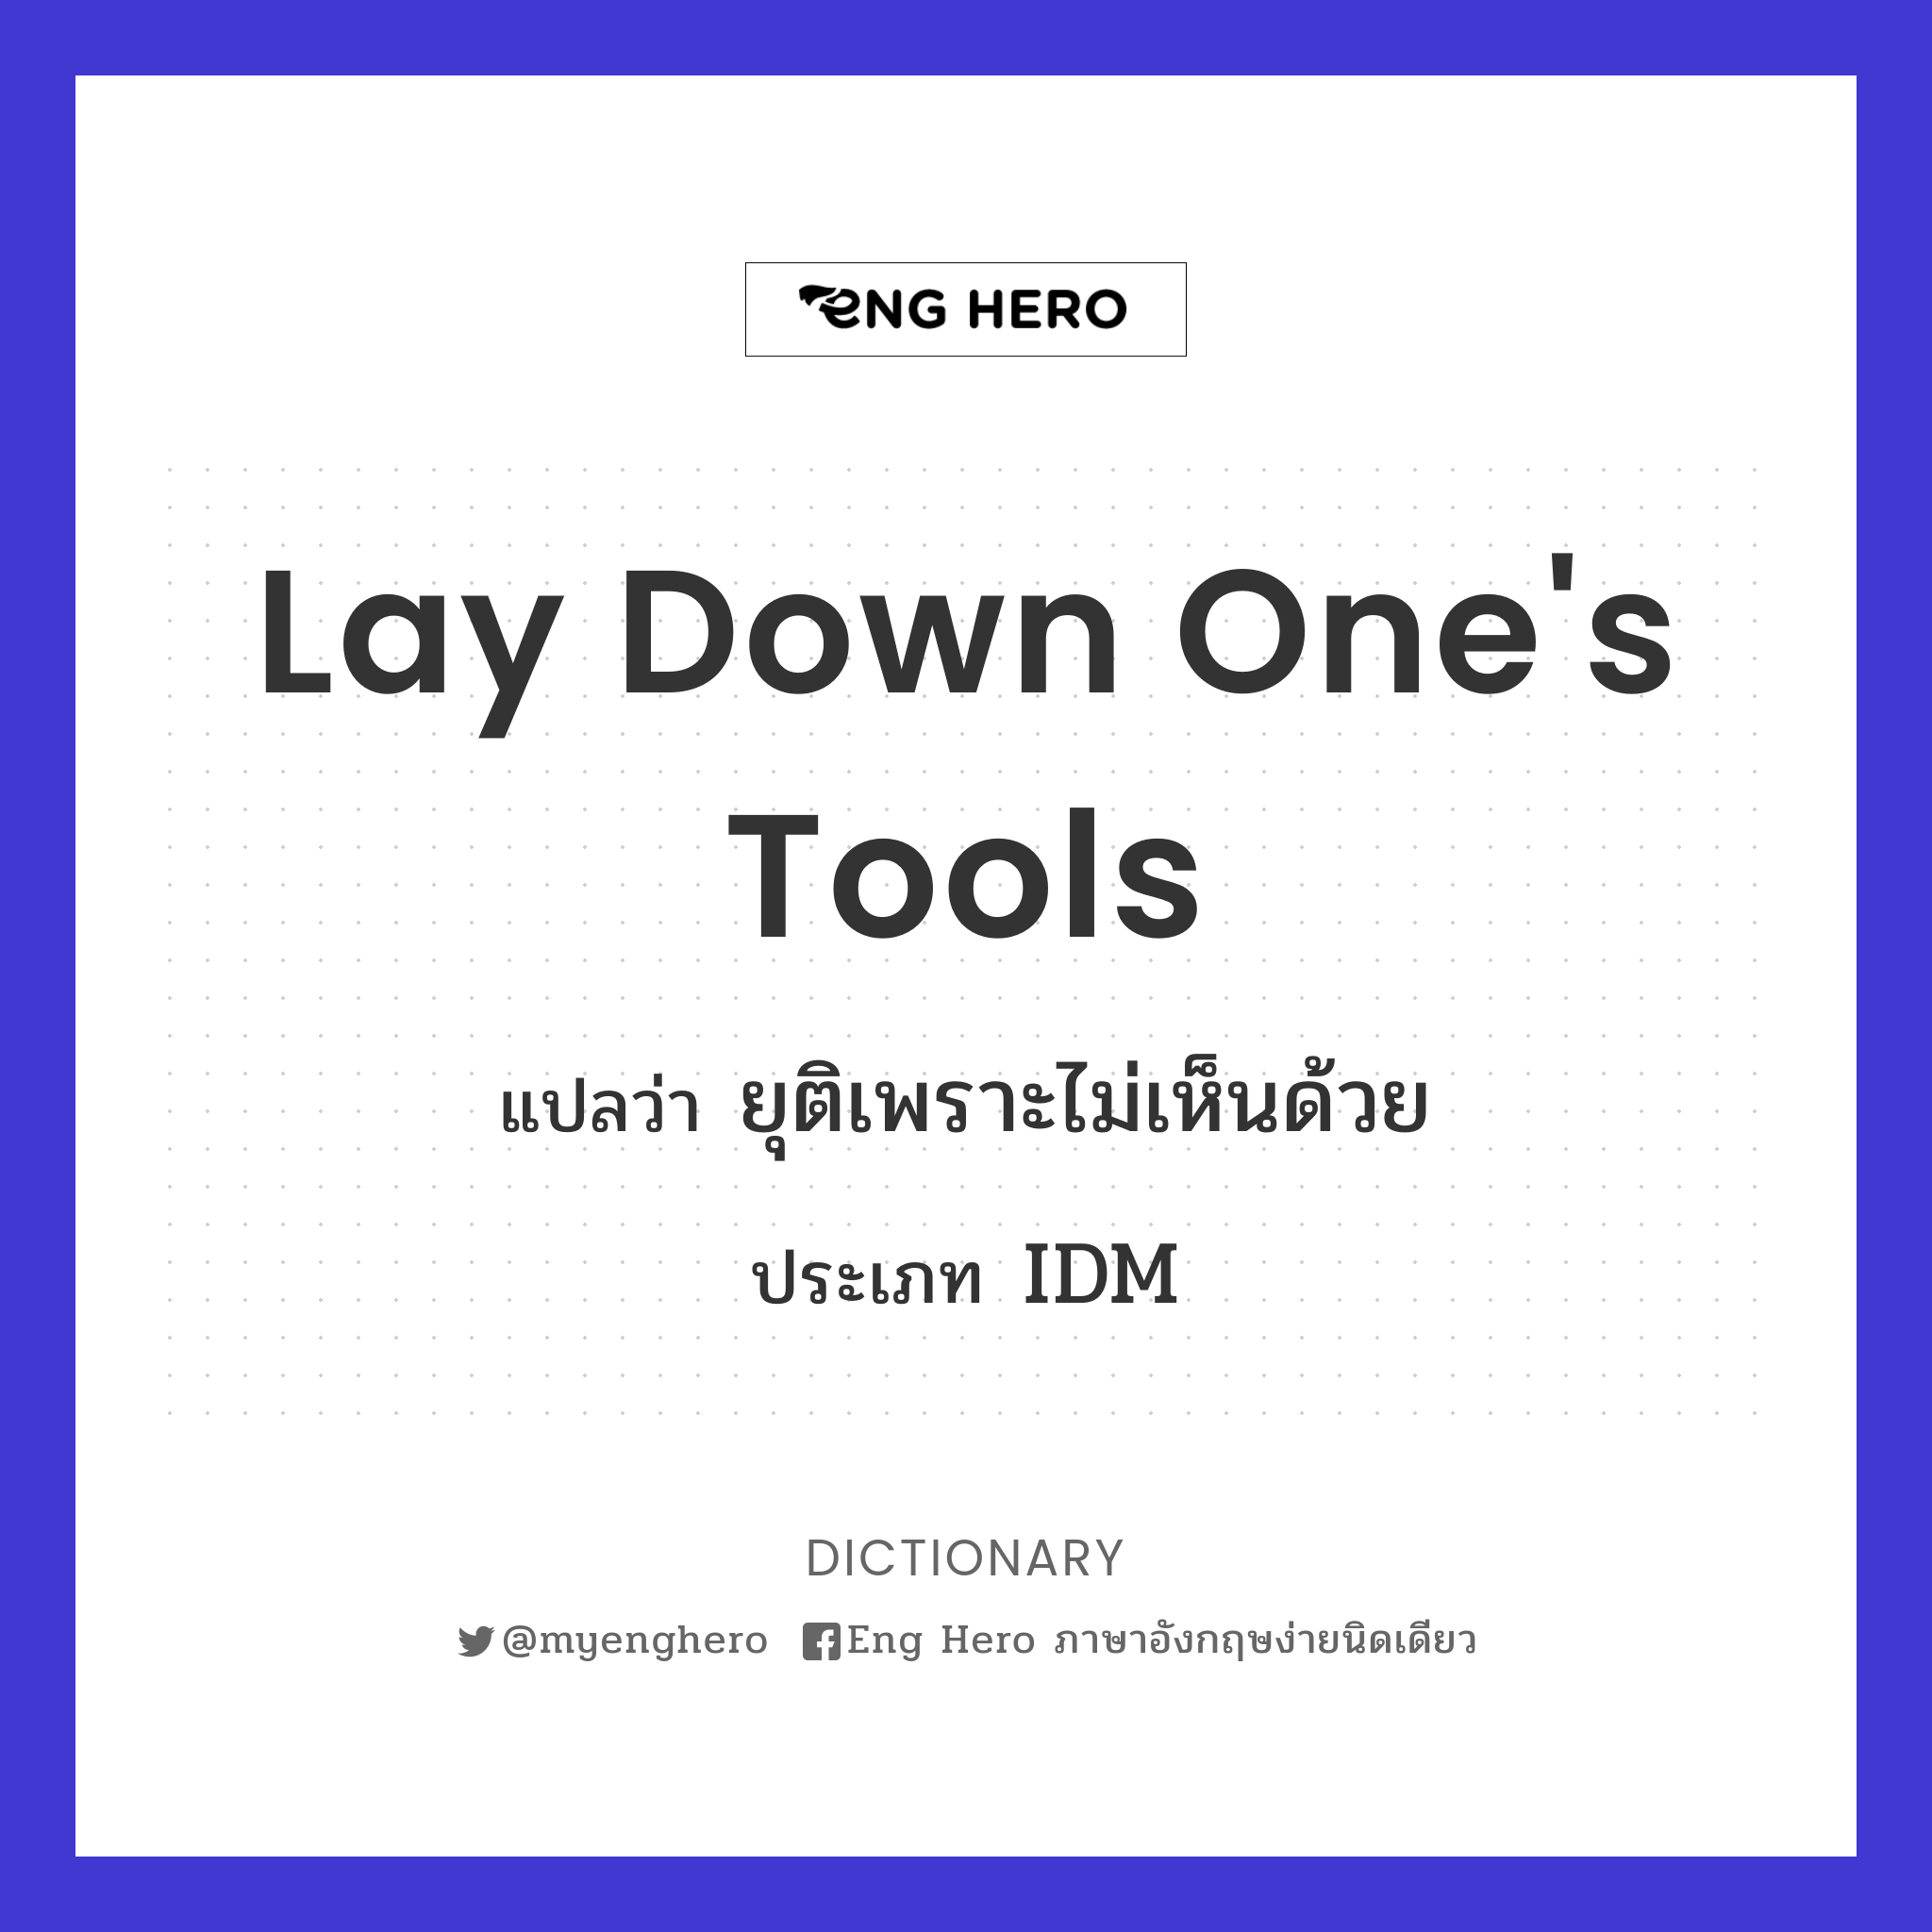 lay down one's tools